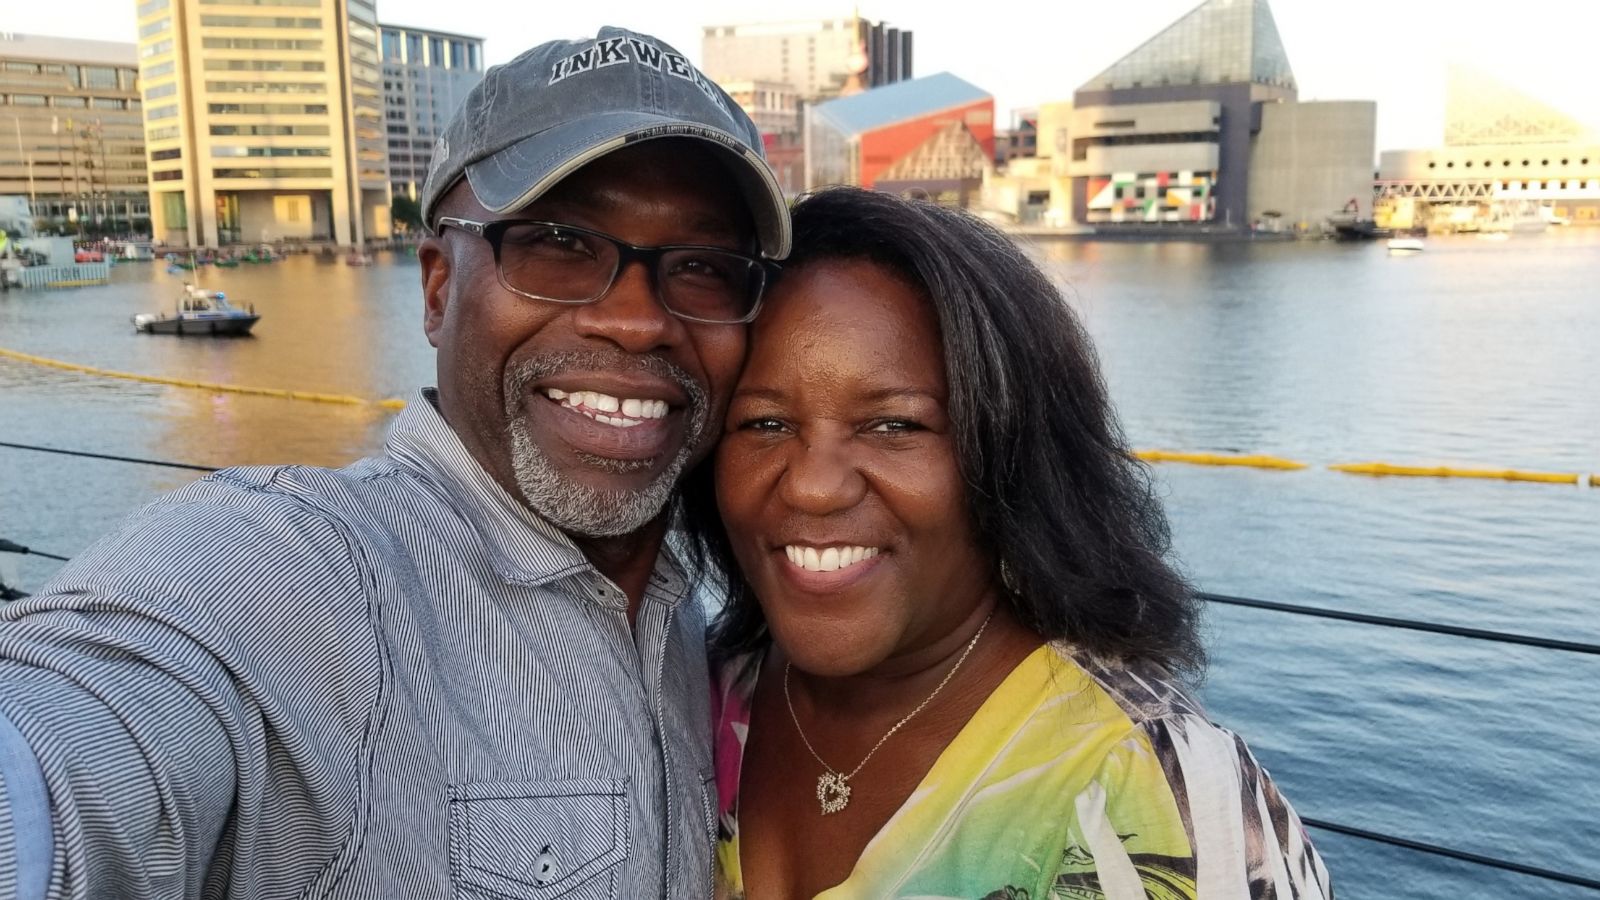 Baltimore City: Jacquelyn Smith Murder Case Update - Where Is Keith Smith Now In 2022?